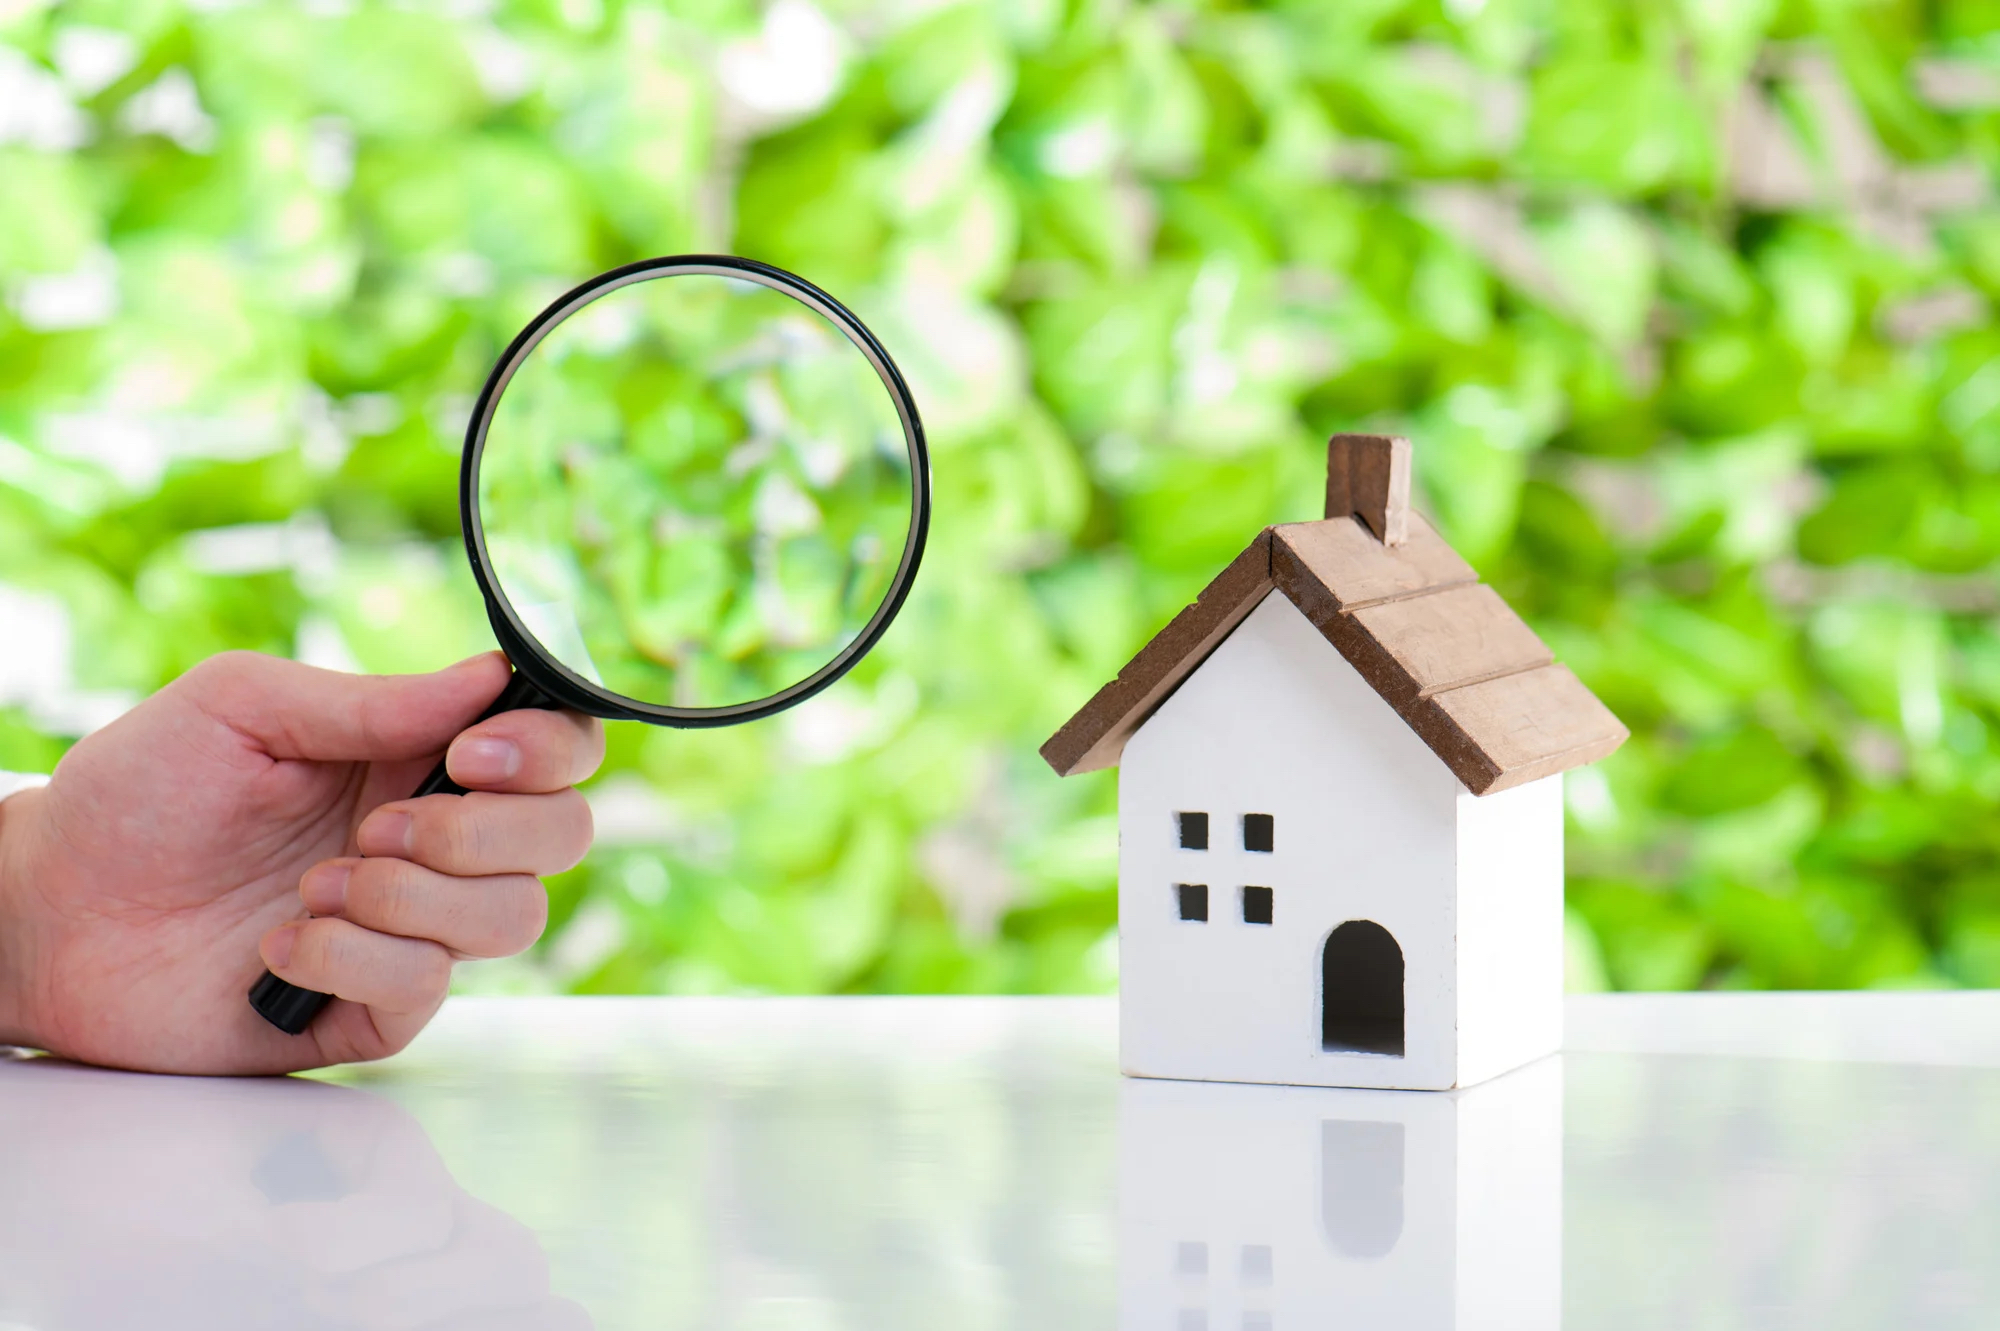 Rental Property Inspections in Covina, CA: How Often Should Landlords Complete Them?